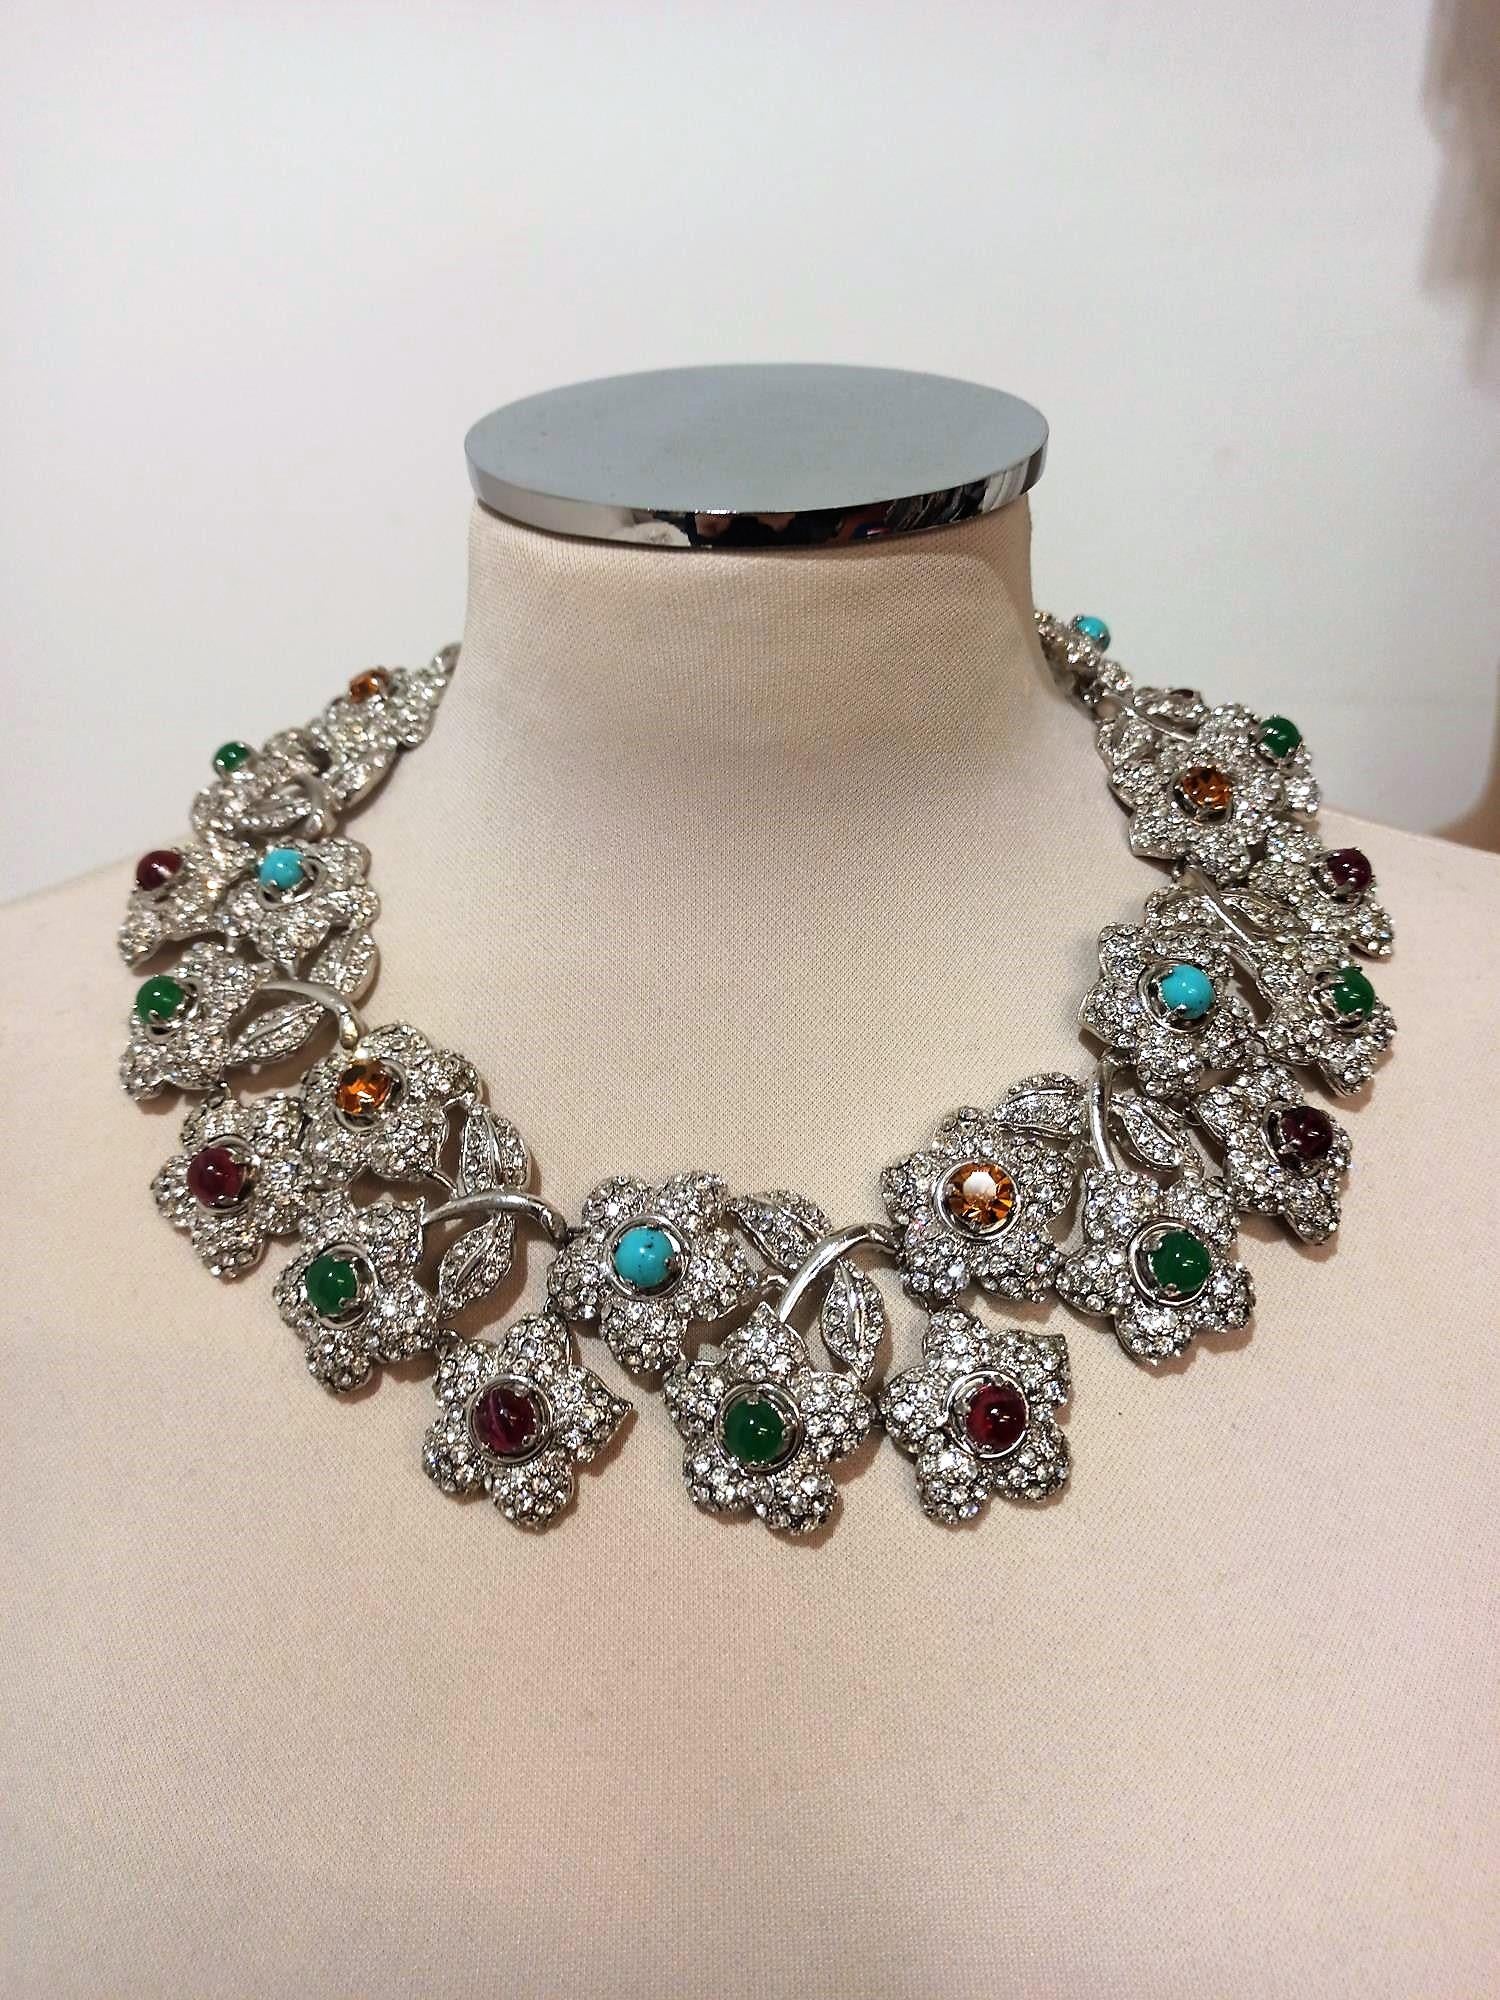 Fantastic piece by Carlo Zini
One of the world greatest bijoux designers
Non allergenic rhodium
Floral theme
Ruby, emerald and amber like crystals
Amazing hand application of swarovski crystals
100% Artisanal work
Made in Milano
Worldwide express